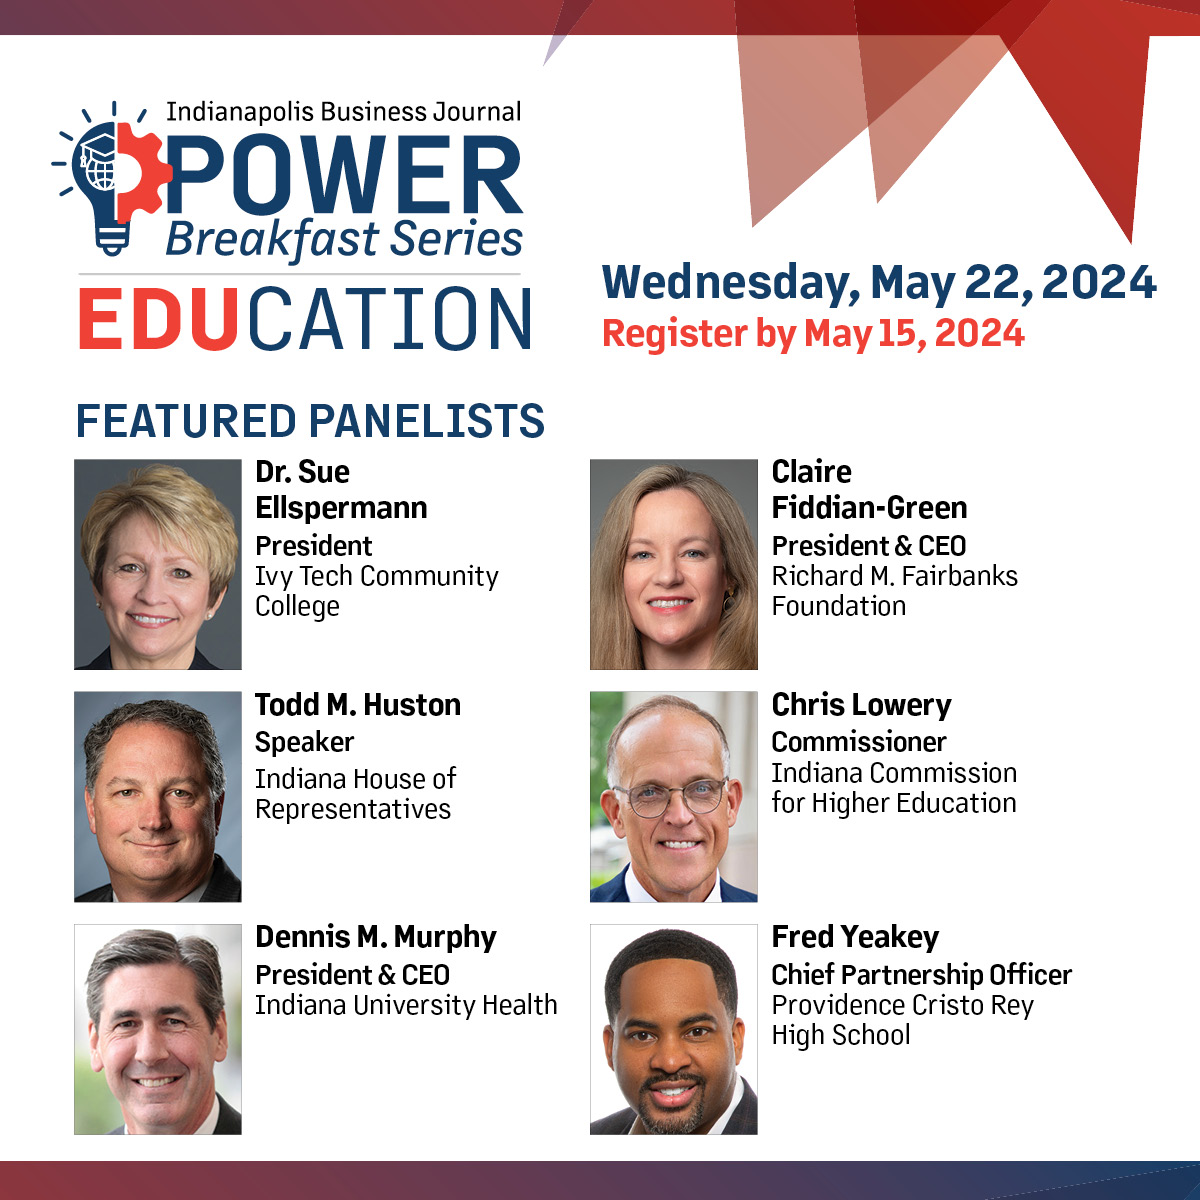 Join us for IBJ's Education Power Breakfast on May 22! Hear from our expert panelists as they explore and debate the job Indiana is doing to prepare students. Don't miss out on this opportunity to network and learn. See you there! 🍎🎒✍️📓 #IBJeducation ow.ly/8z8E50Rl8yl